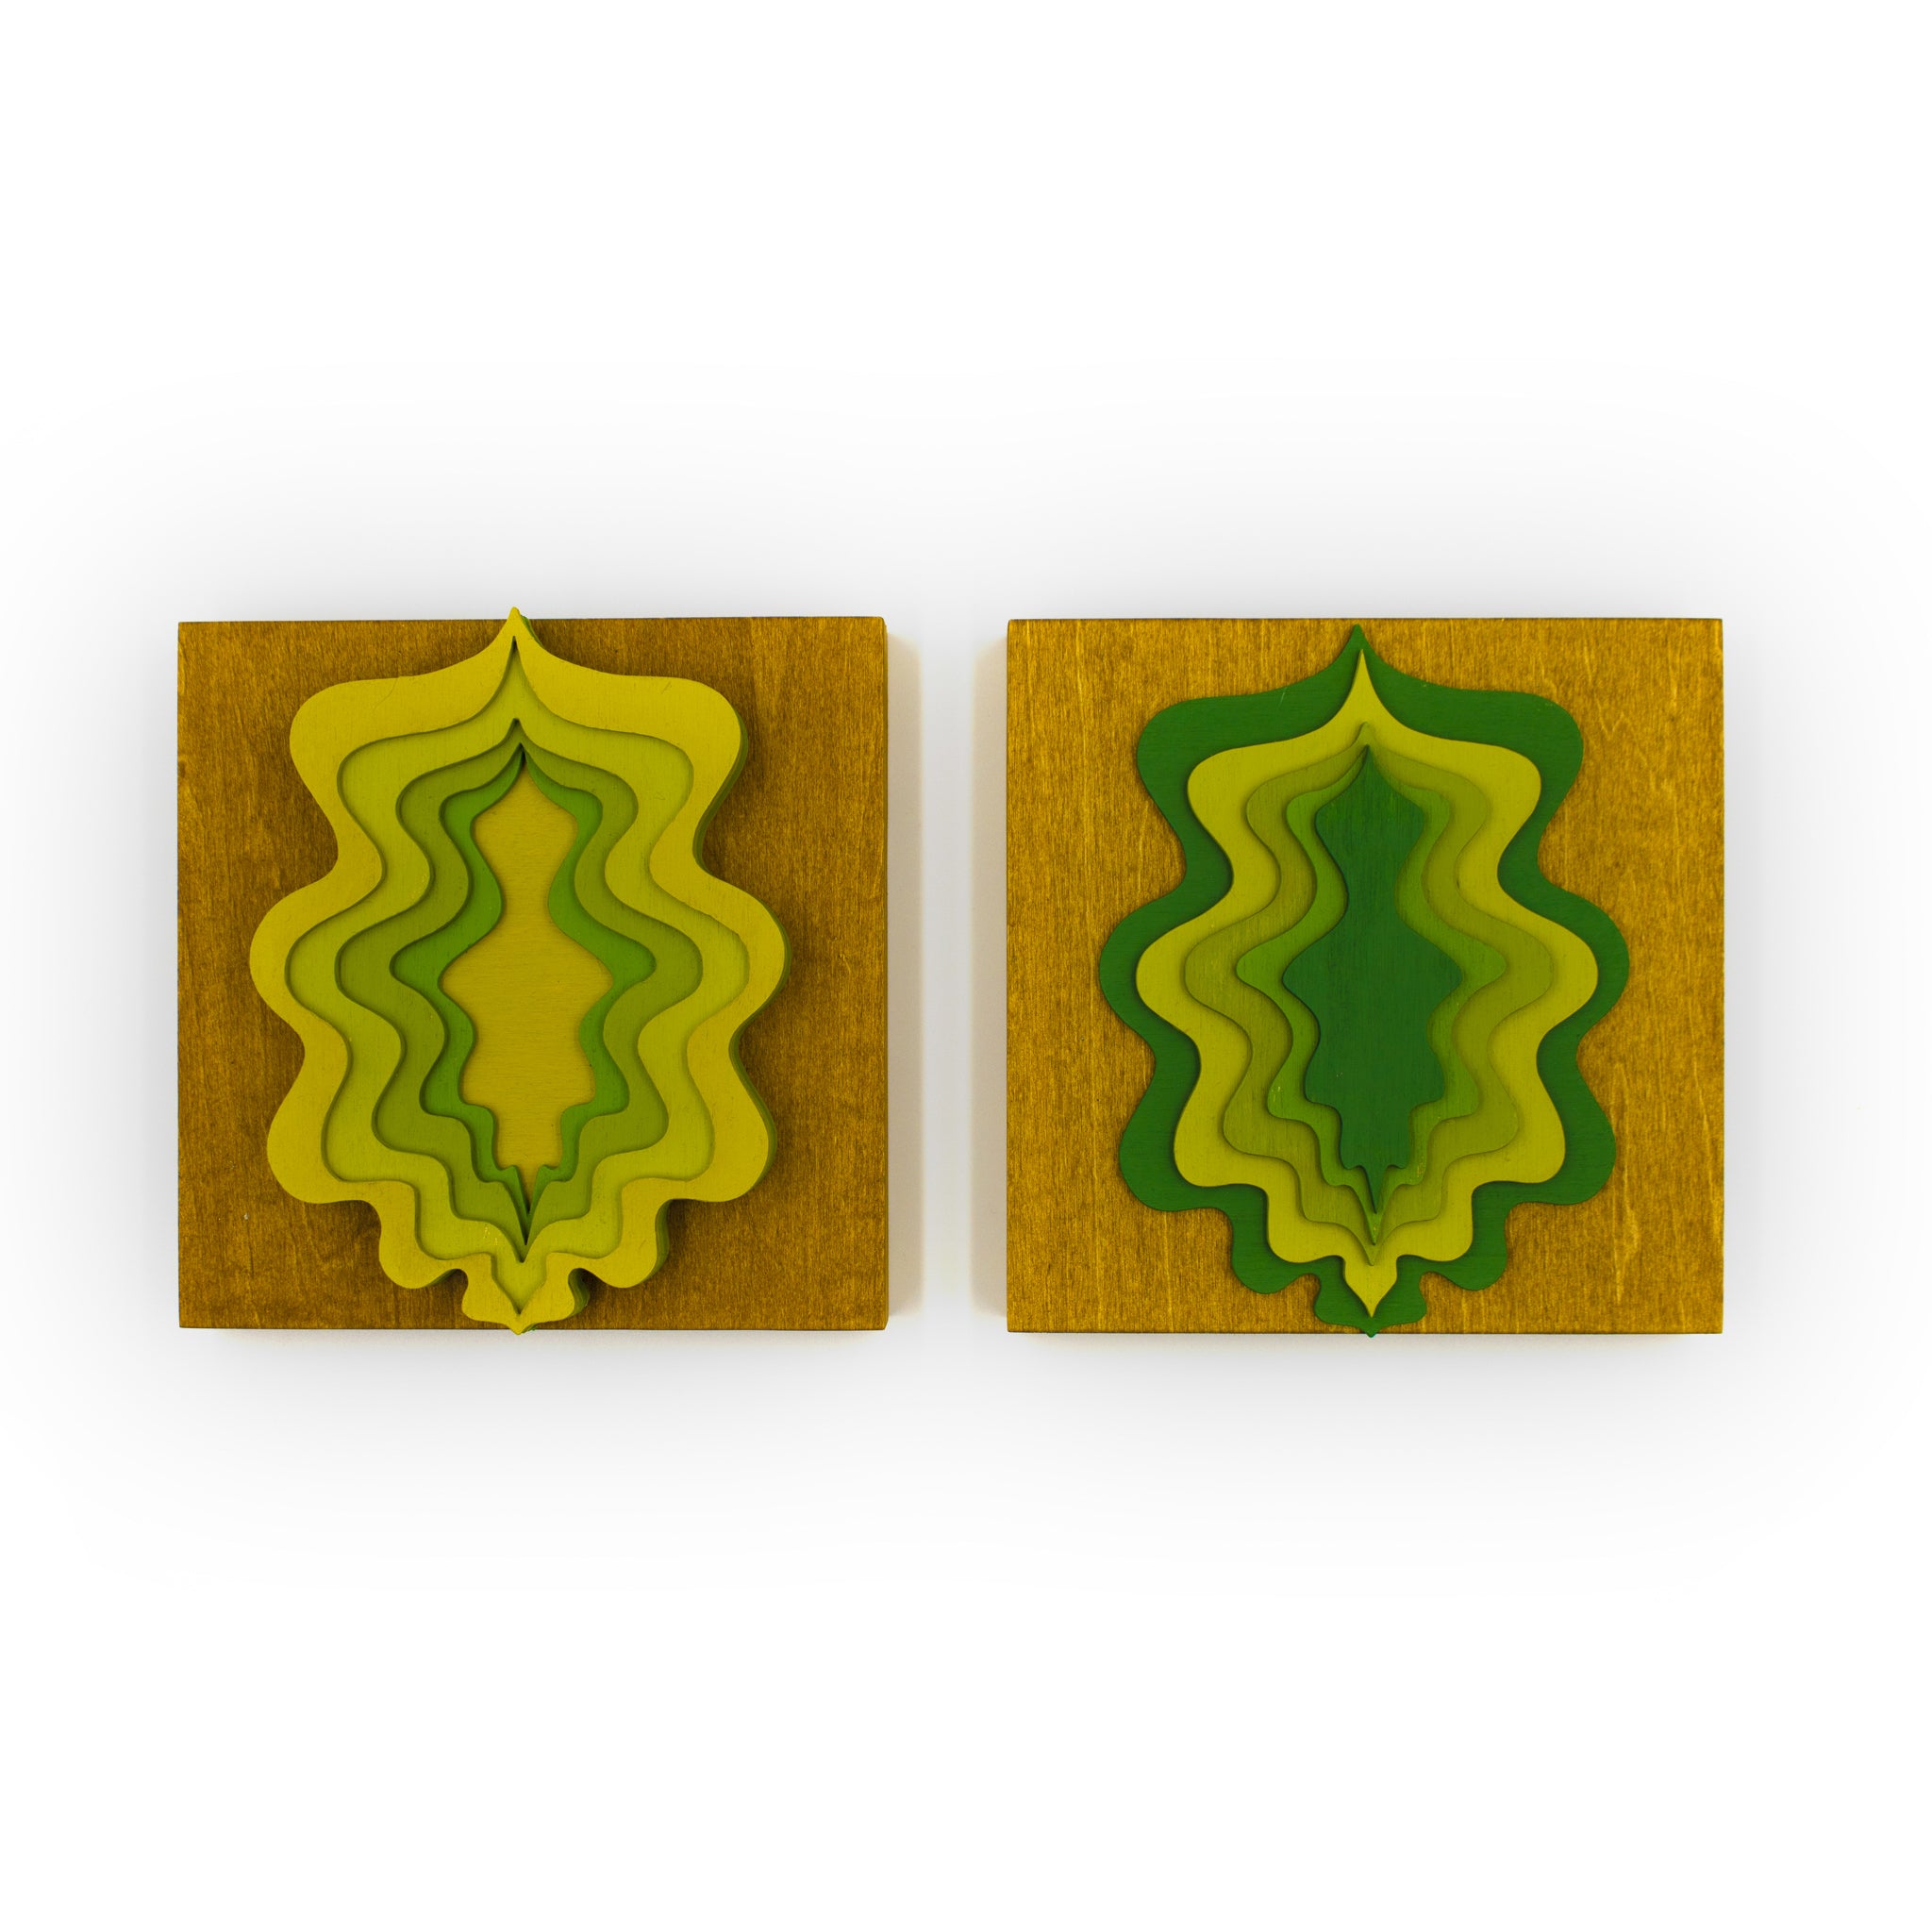  Green Goddess Portals- Layered and painted laser cut wood on wood panel. Each purchase comes as a set of two portals: one going outward and one coming inward.